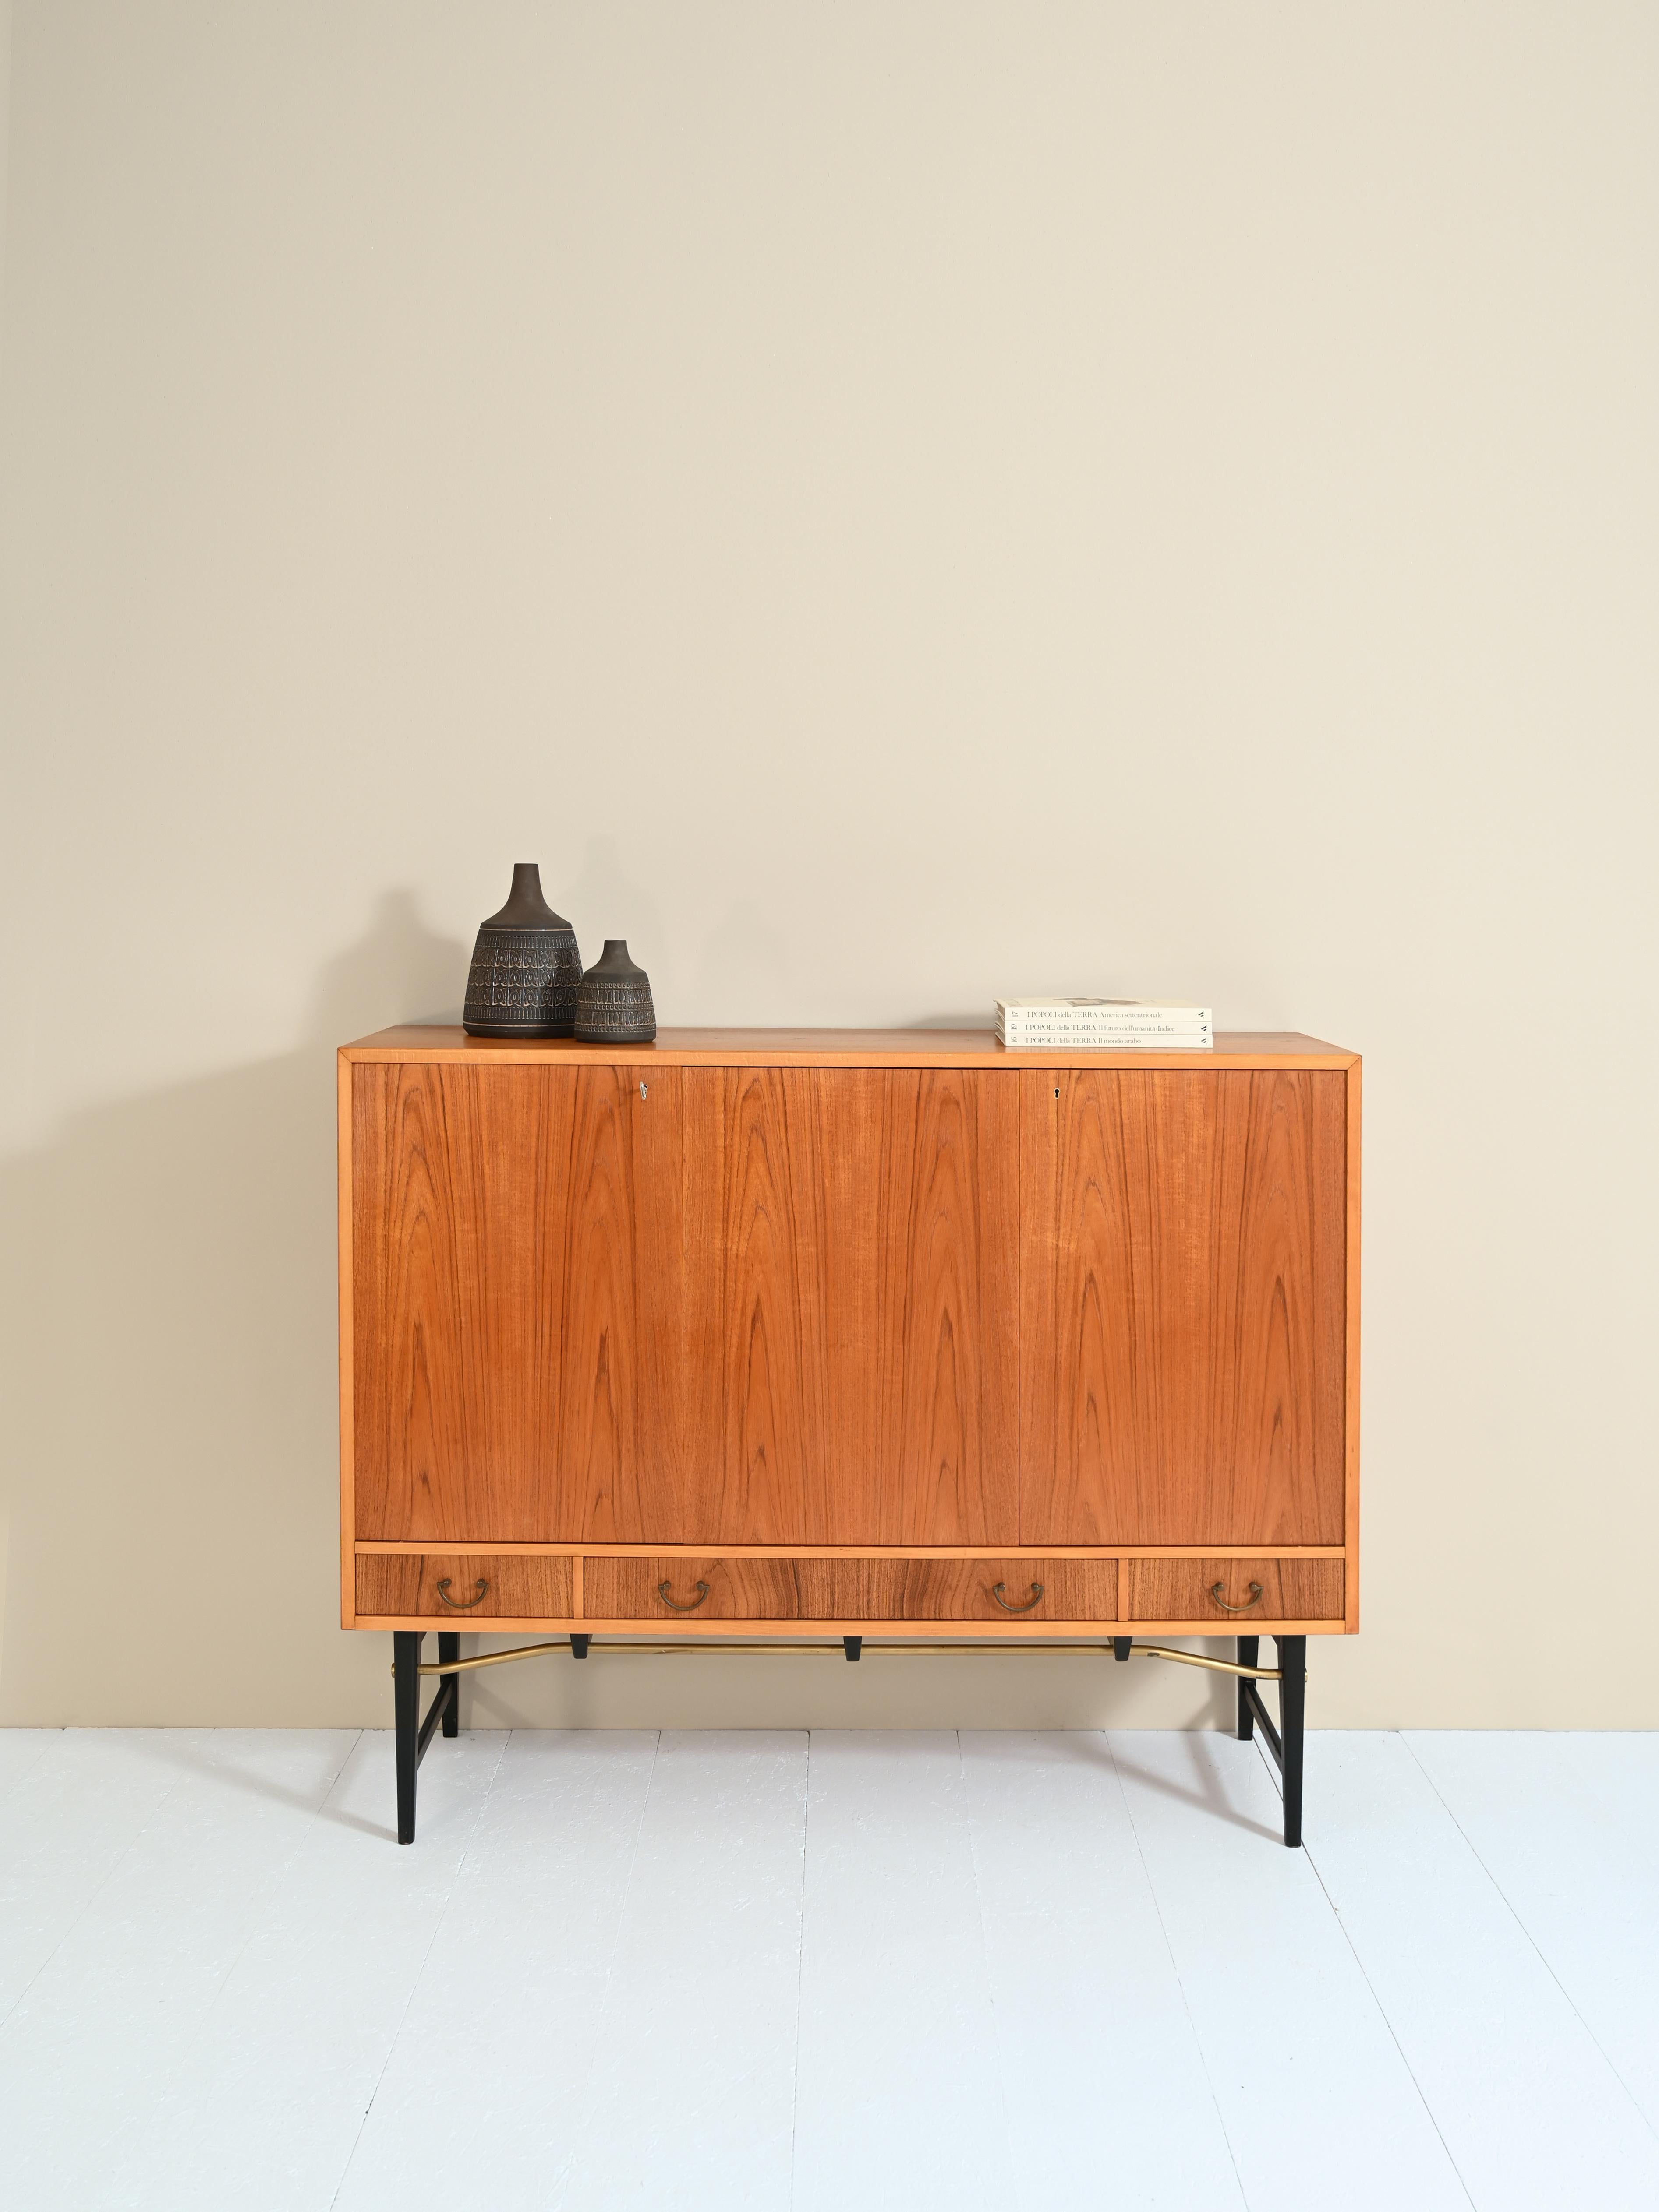 Teak sideboard with black painted feet.
The manufacture is Swedish original vintage.
Consists internally of two compartments with height-adjustable shelves.
Externally the cabinet is symmetrical due to the three hinged doors and four drawers with